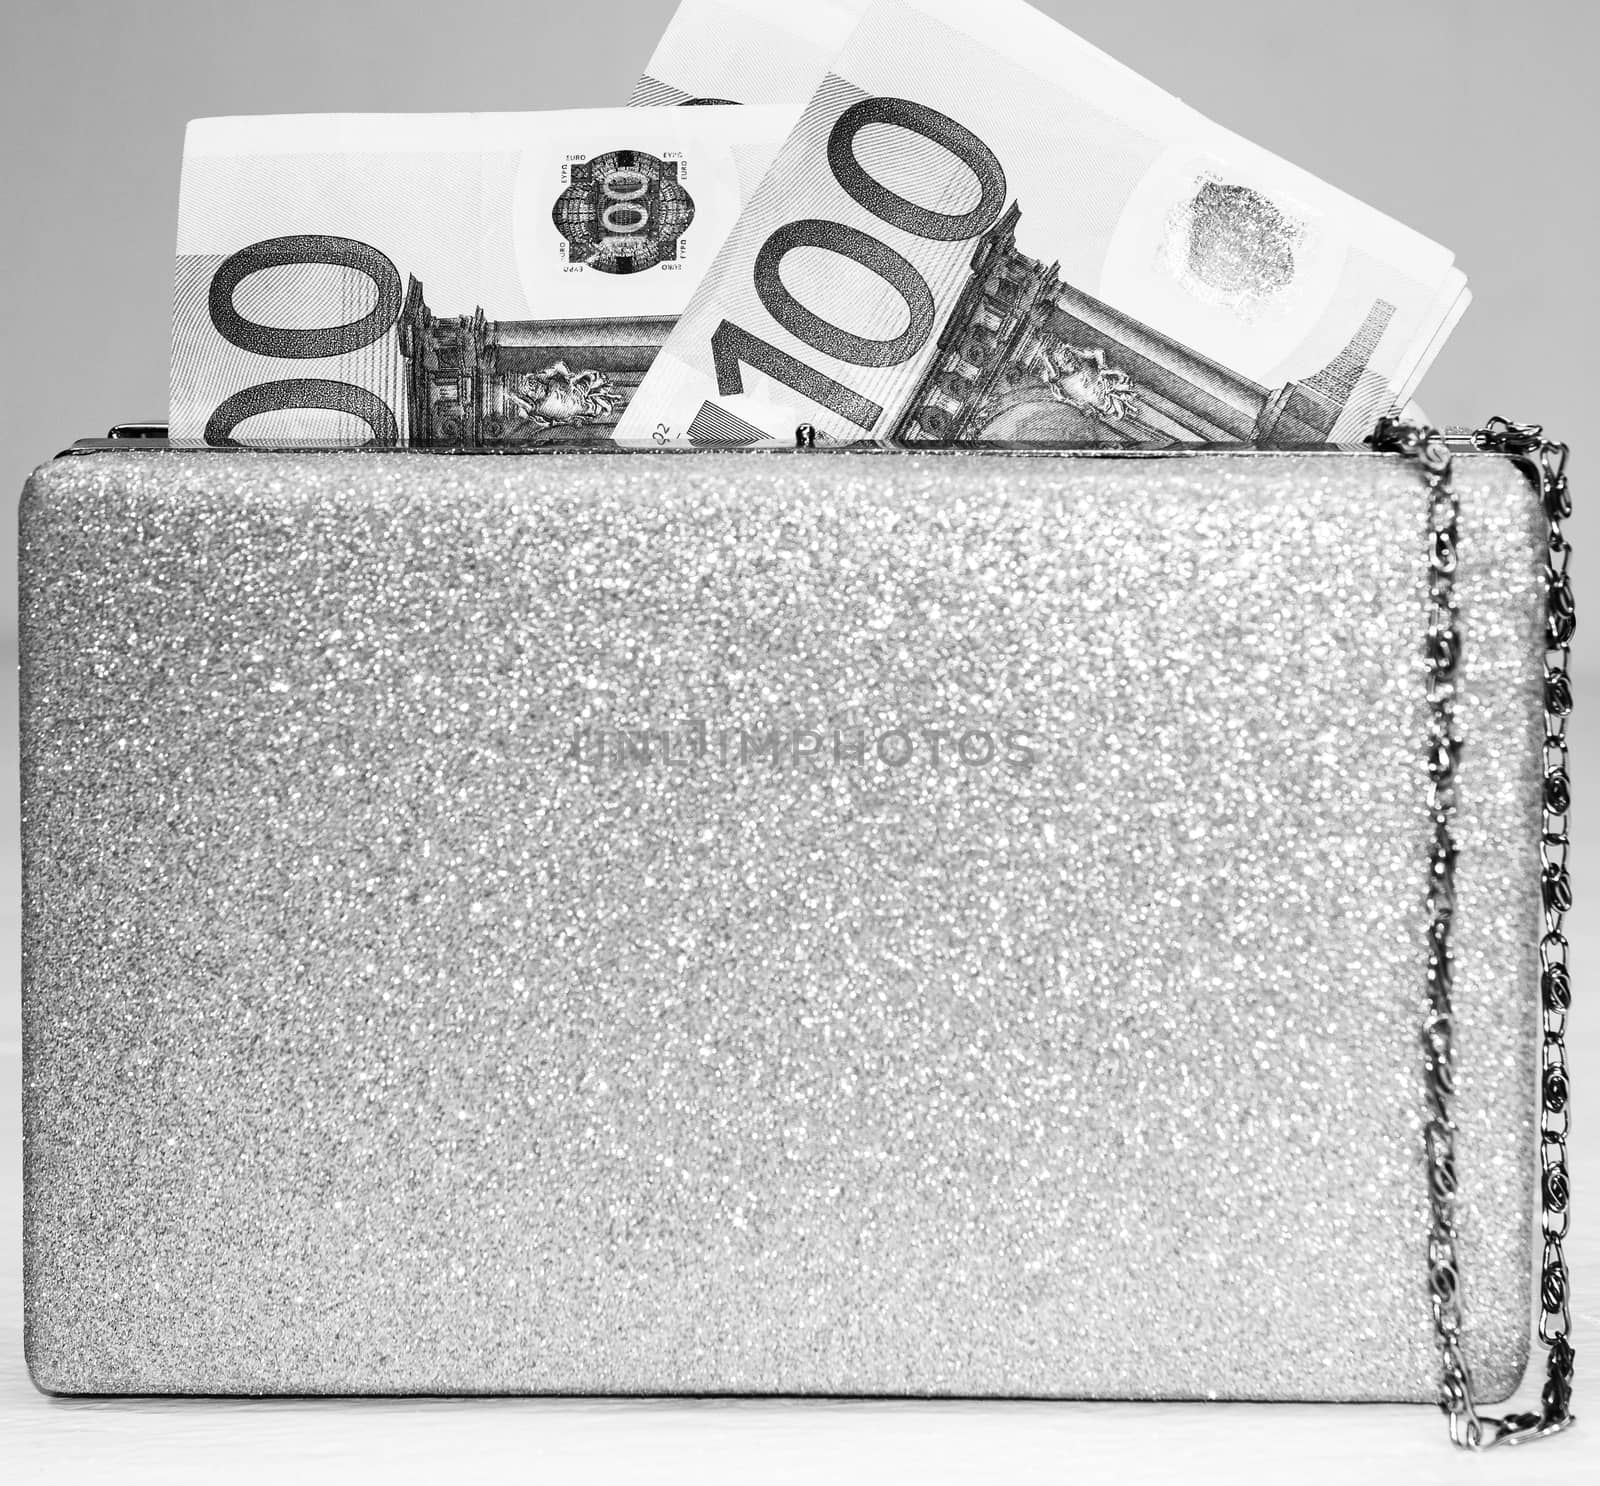 Glittery silver clutch bag with money isolated on white backgrou by vladispas